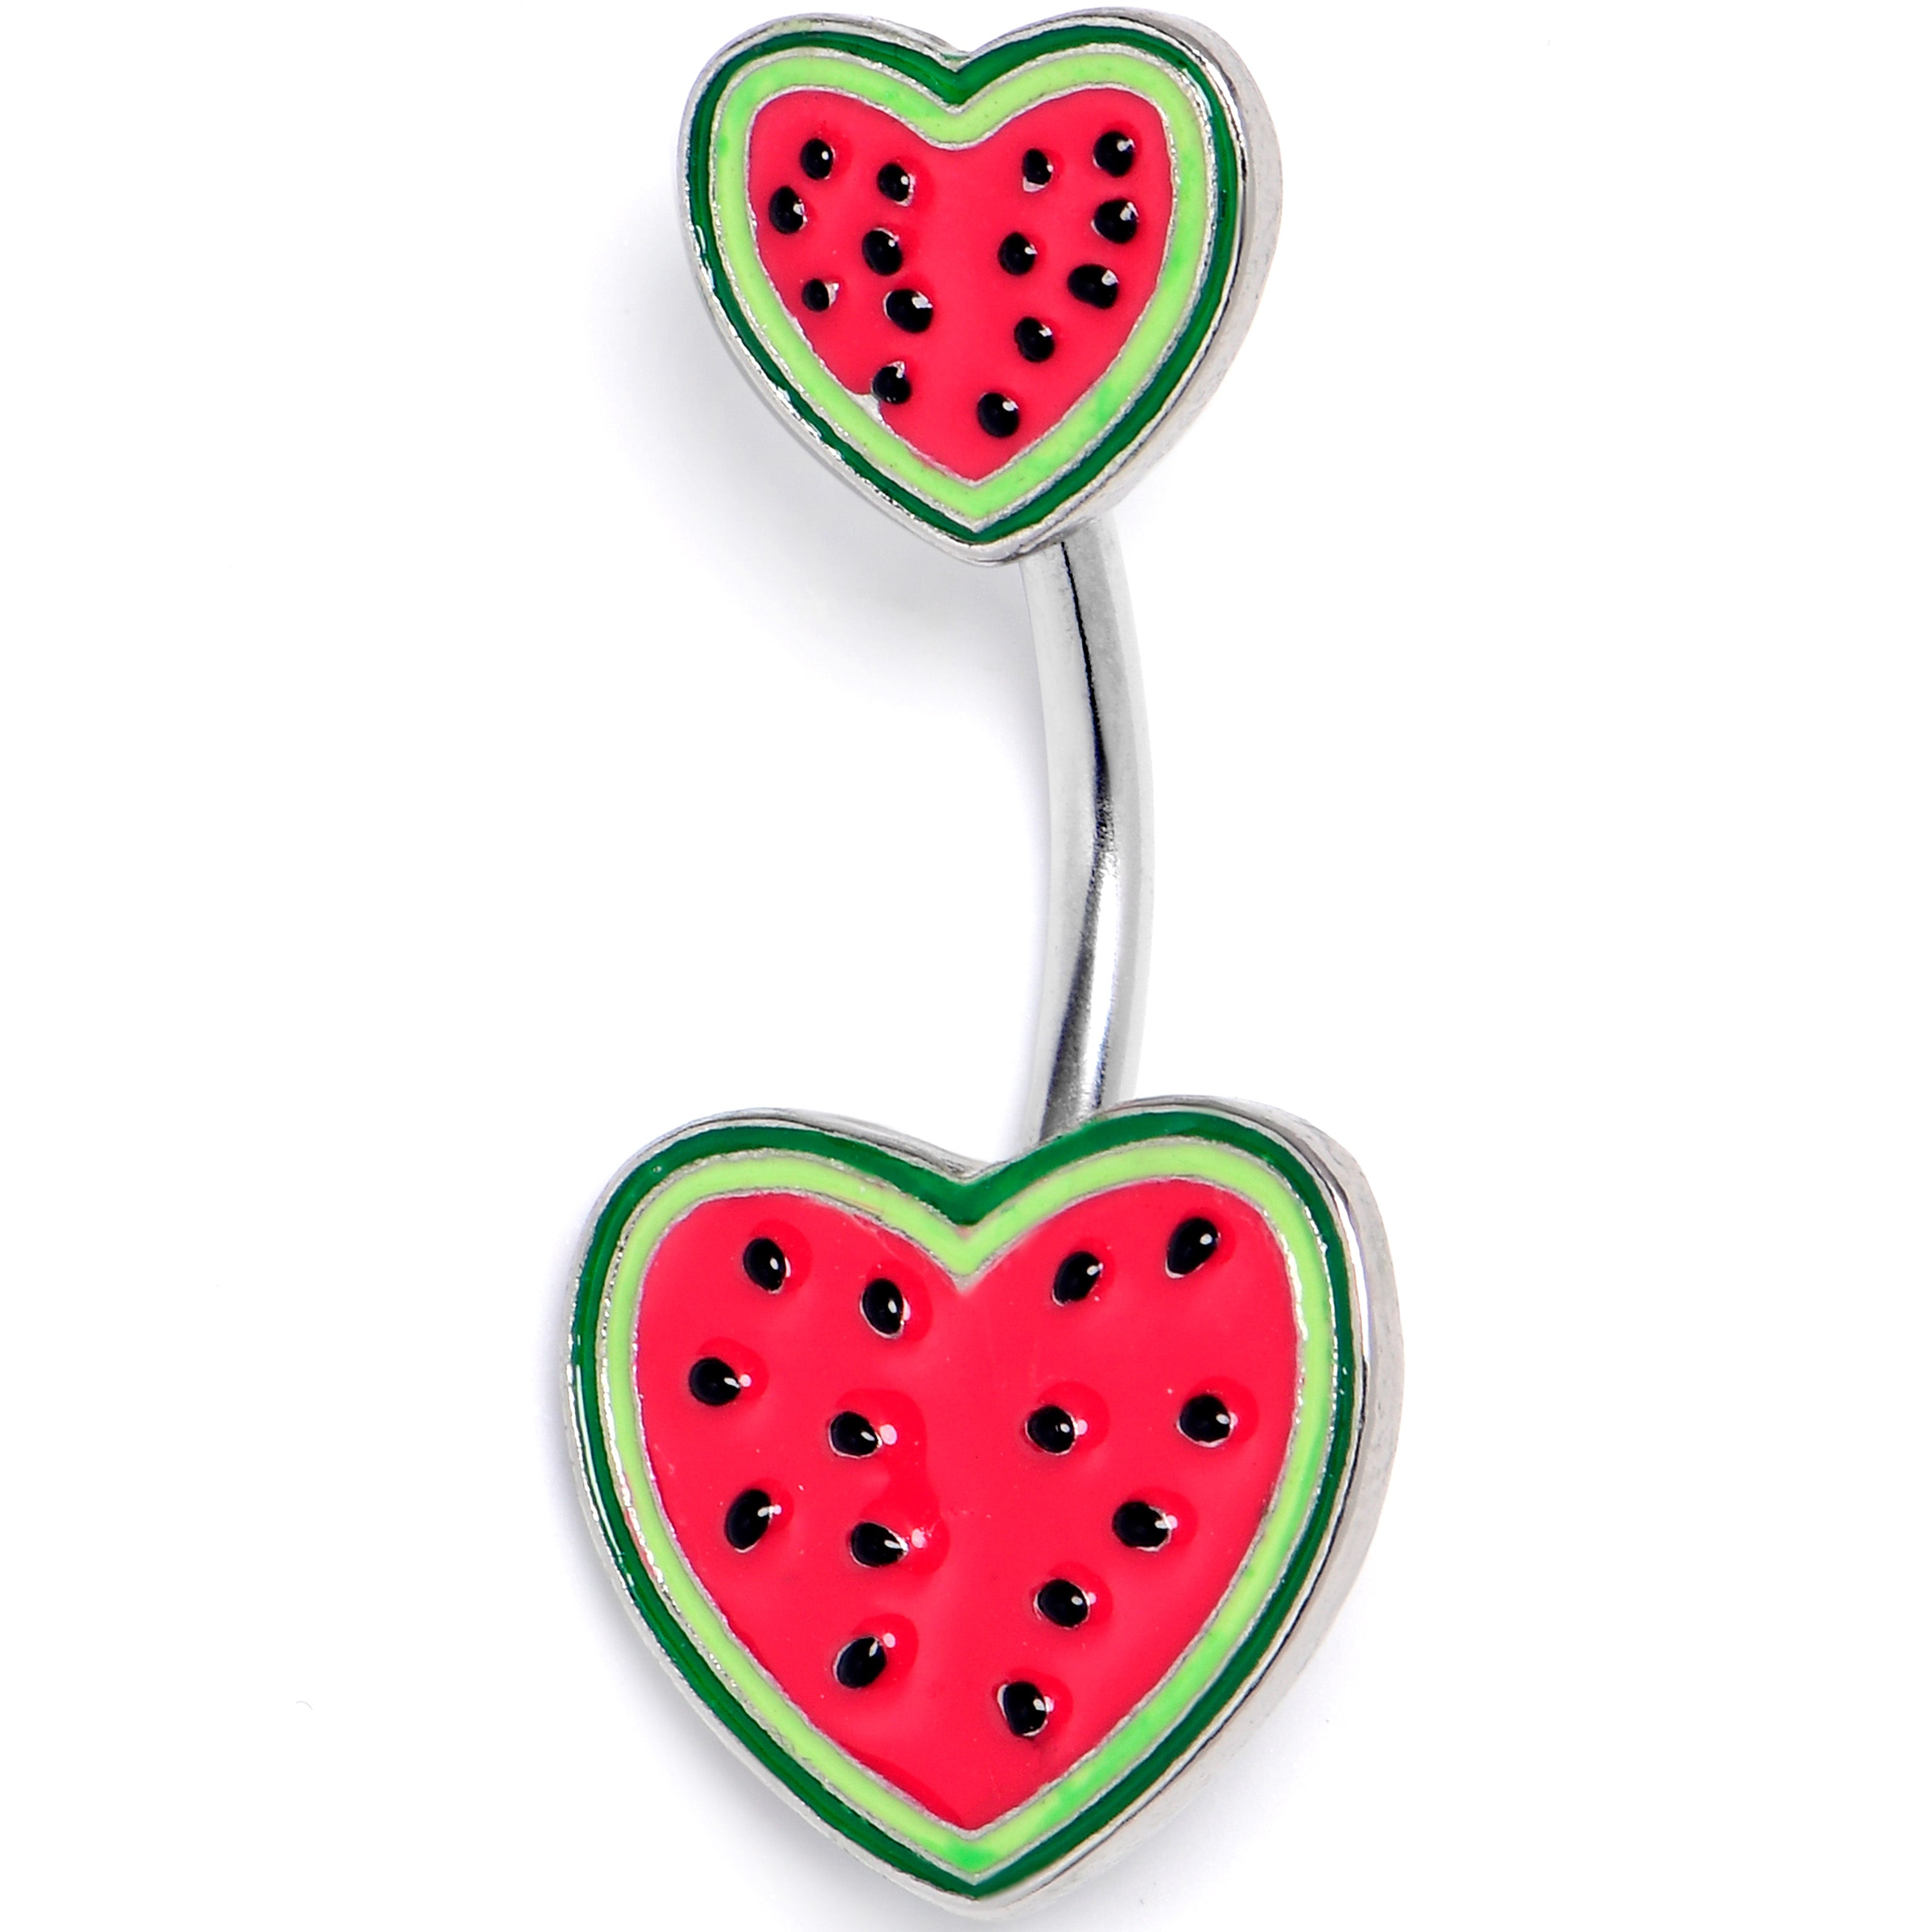 Watermelon Hearts Double Mount Belly Ring